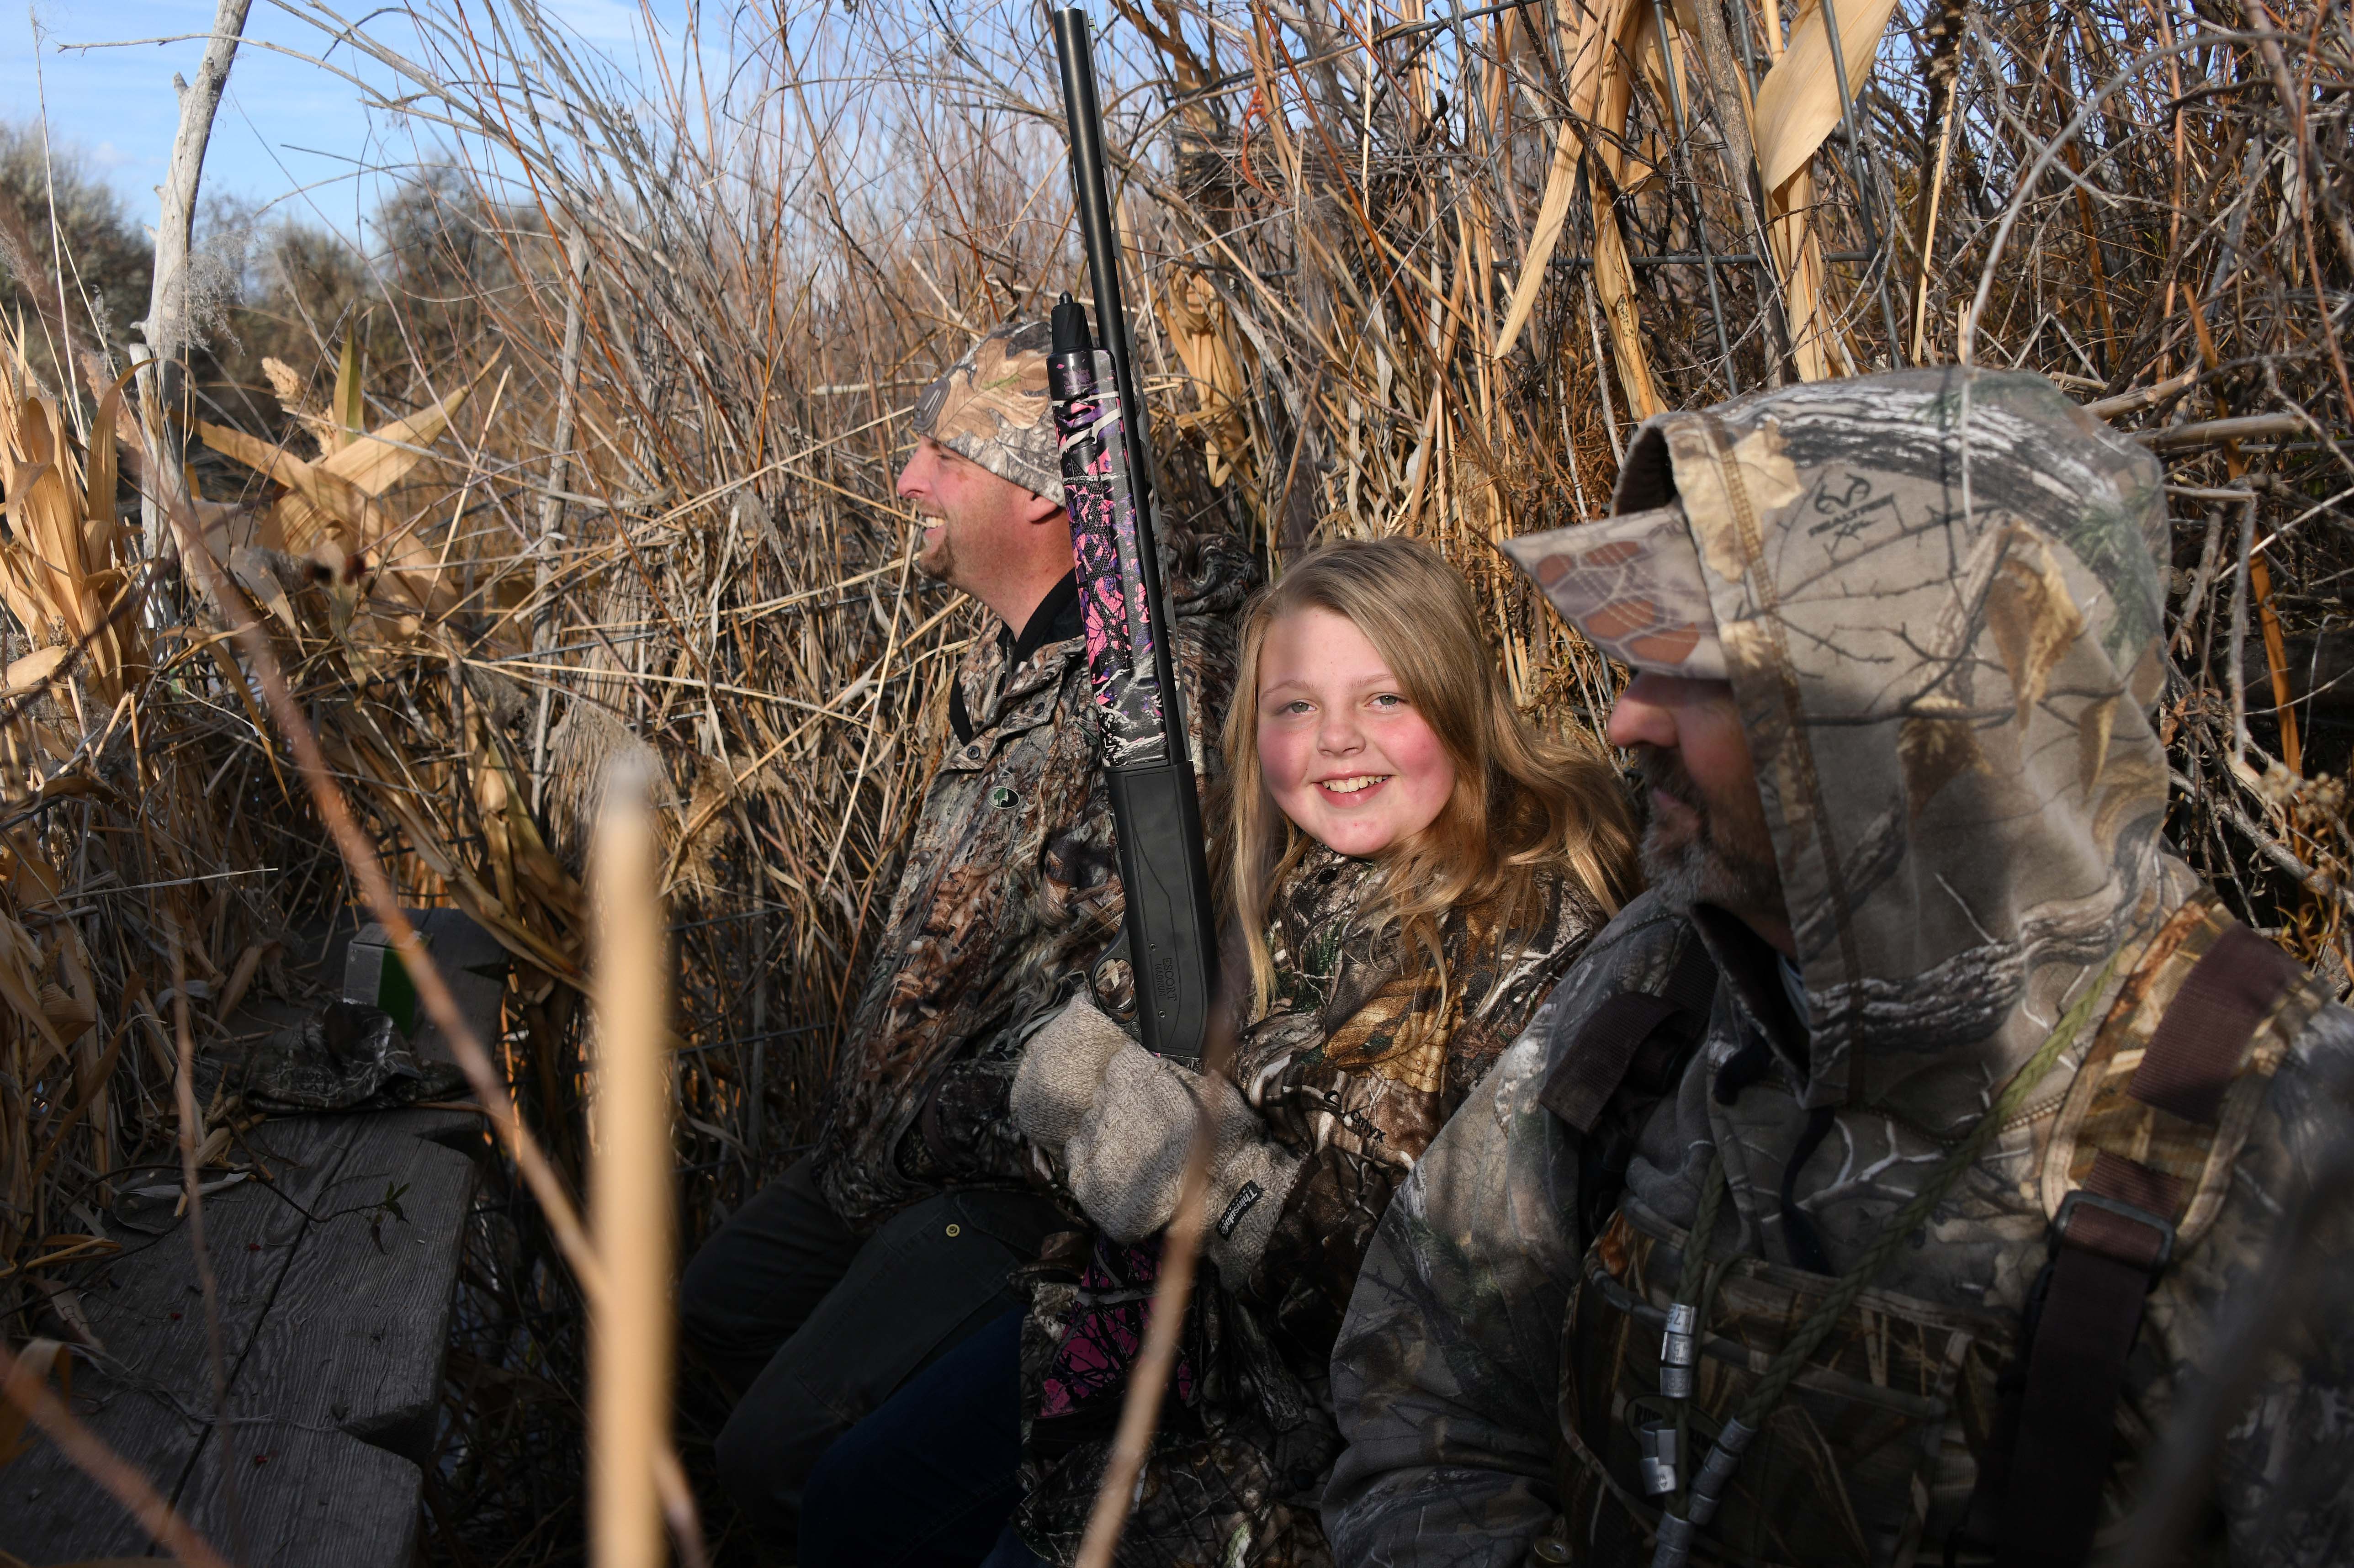 A recent hunter education graduate participates in a mentored waterfowl hunt at the Hagerman WMA.